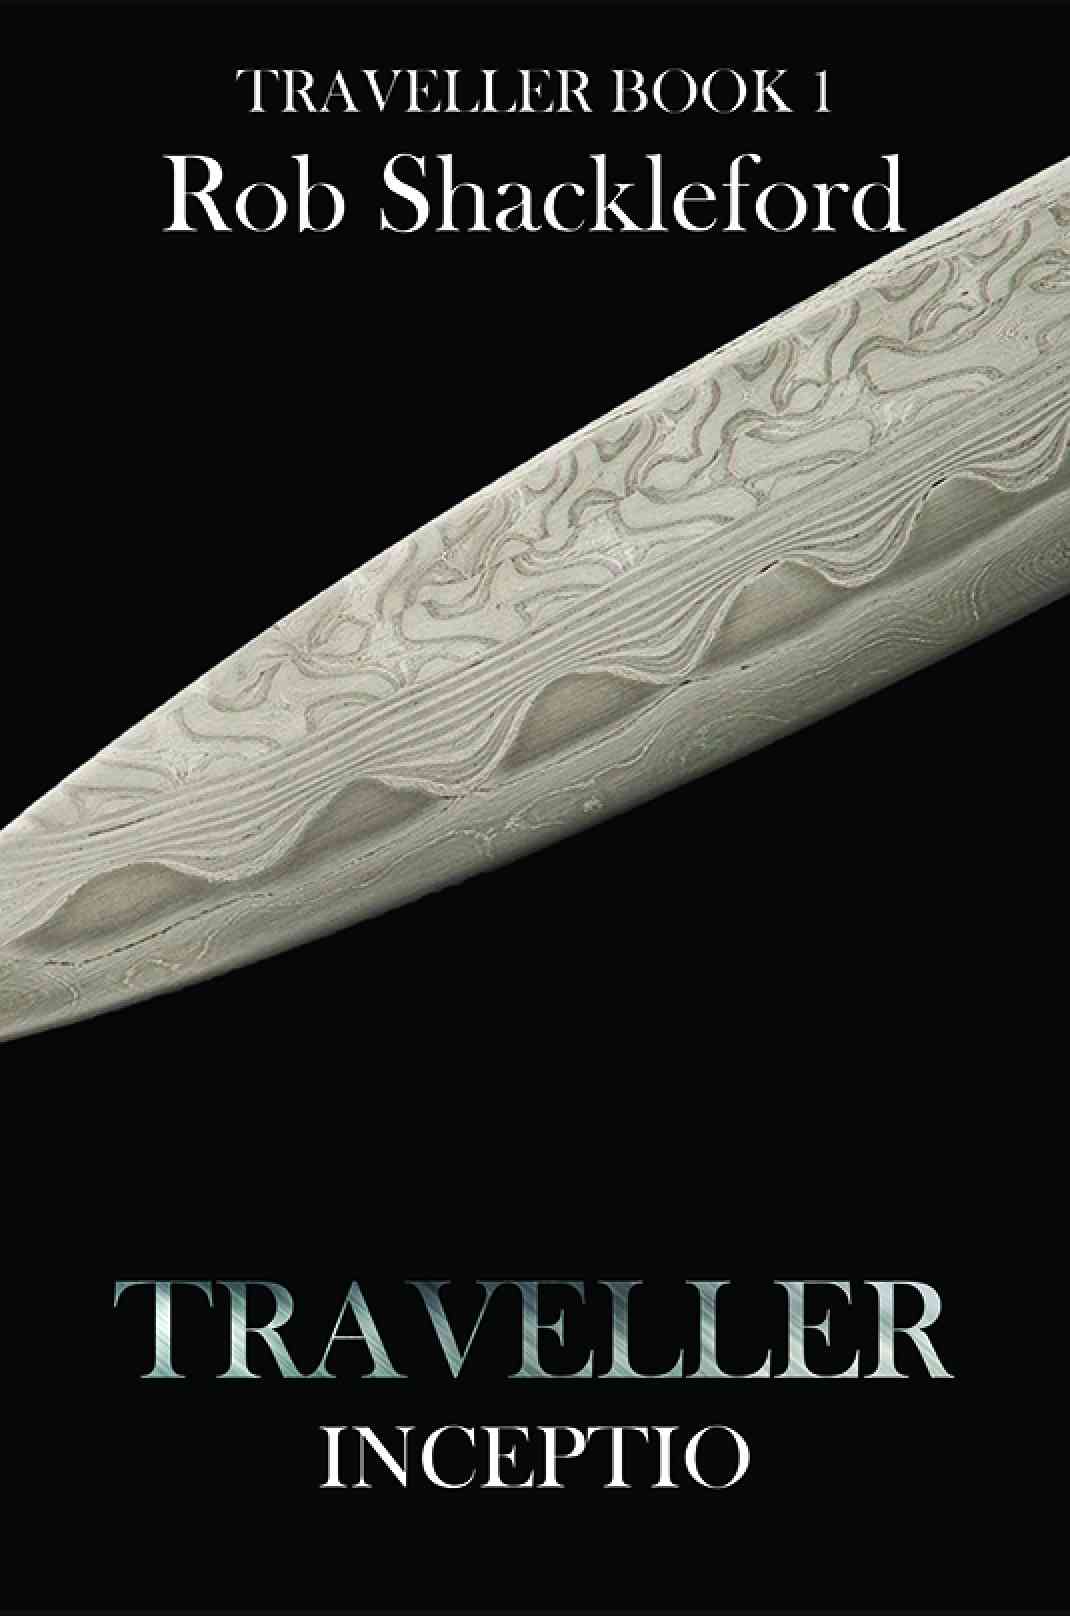 Traveller Inceptio by Author Rob Shackleford